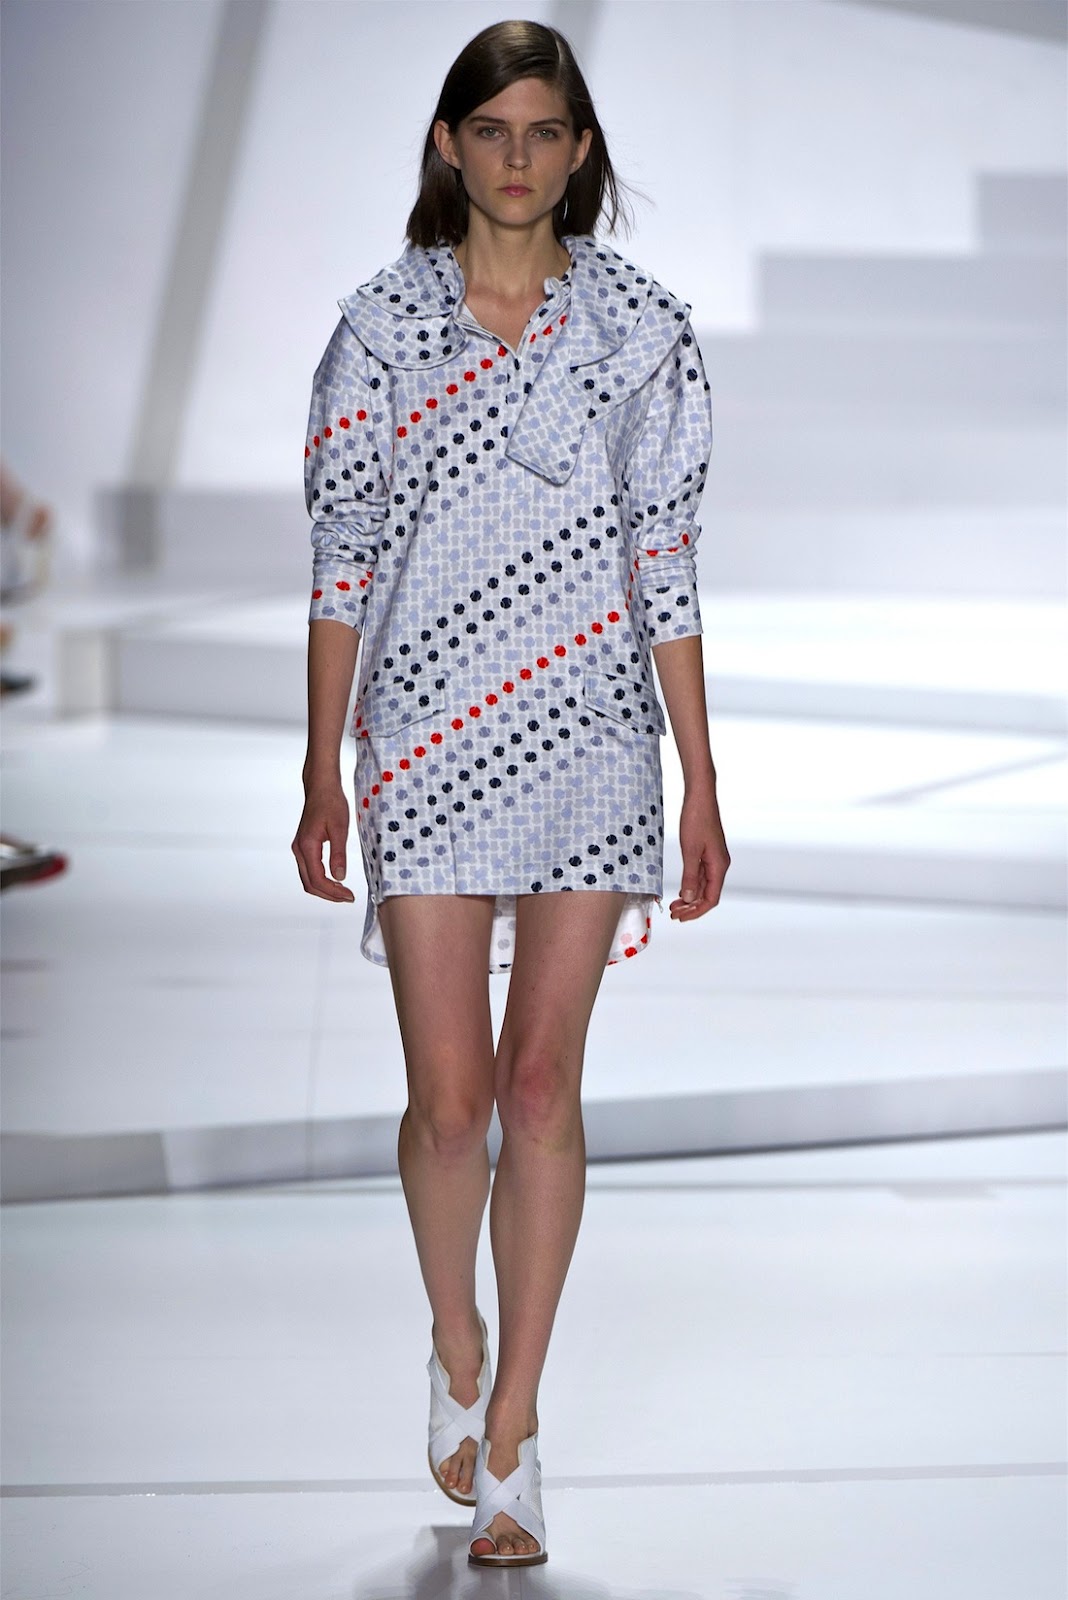 lacoste s/s 13 new york | visual optimism; fashion editorials, shows ...